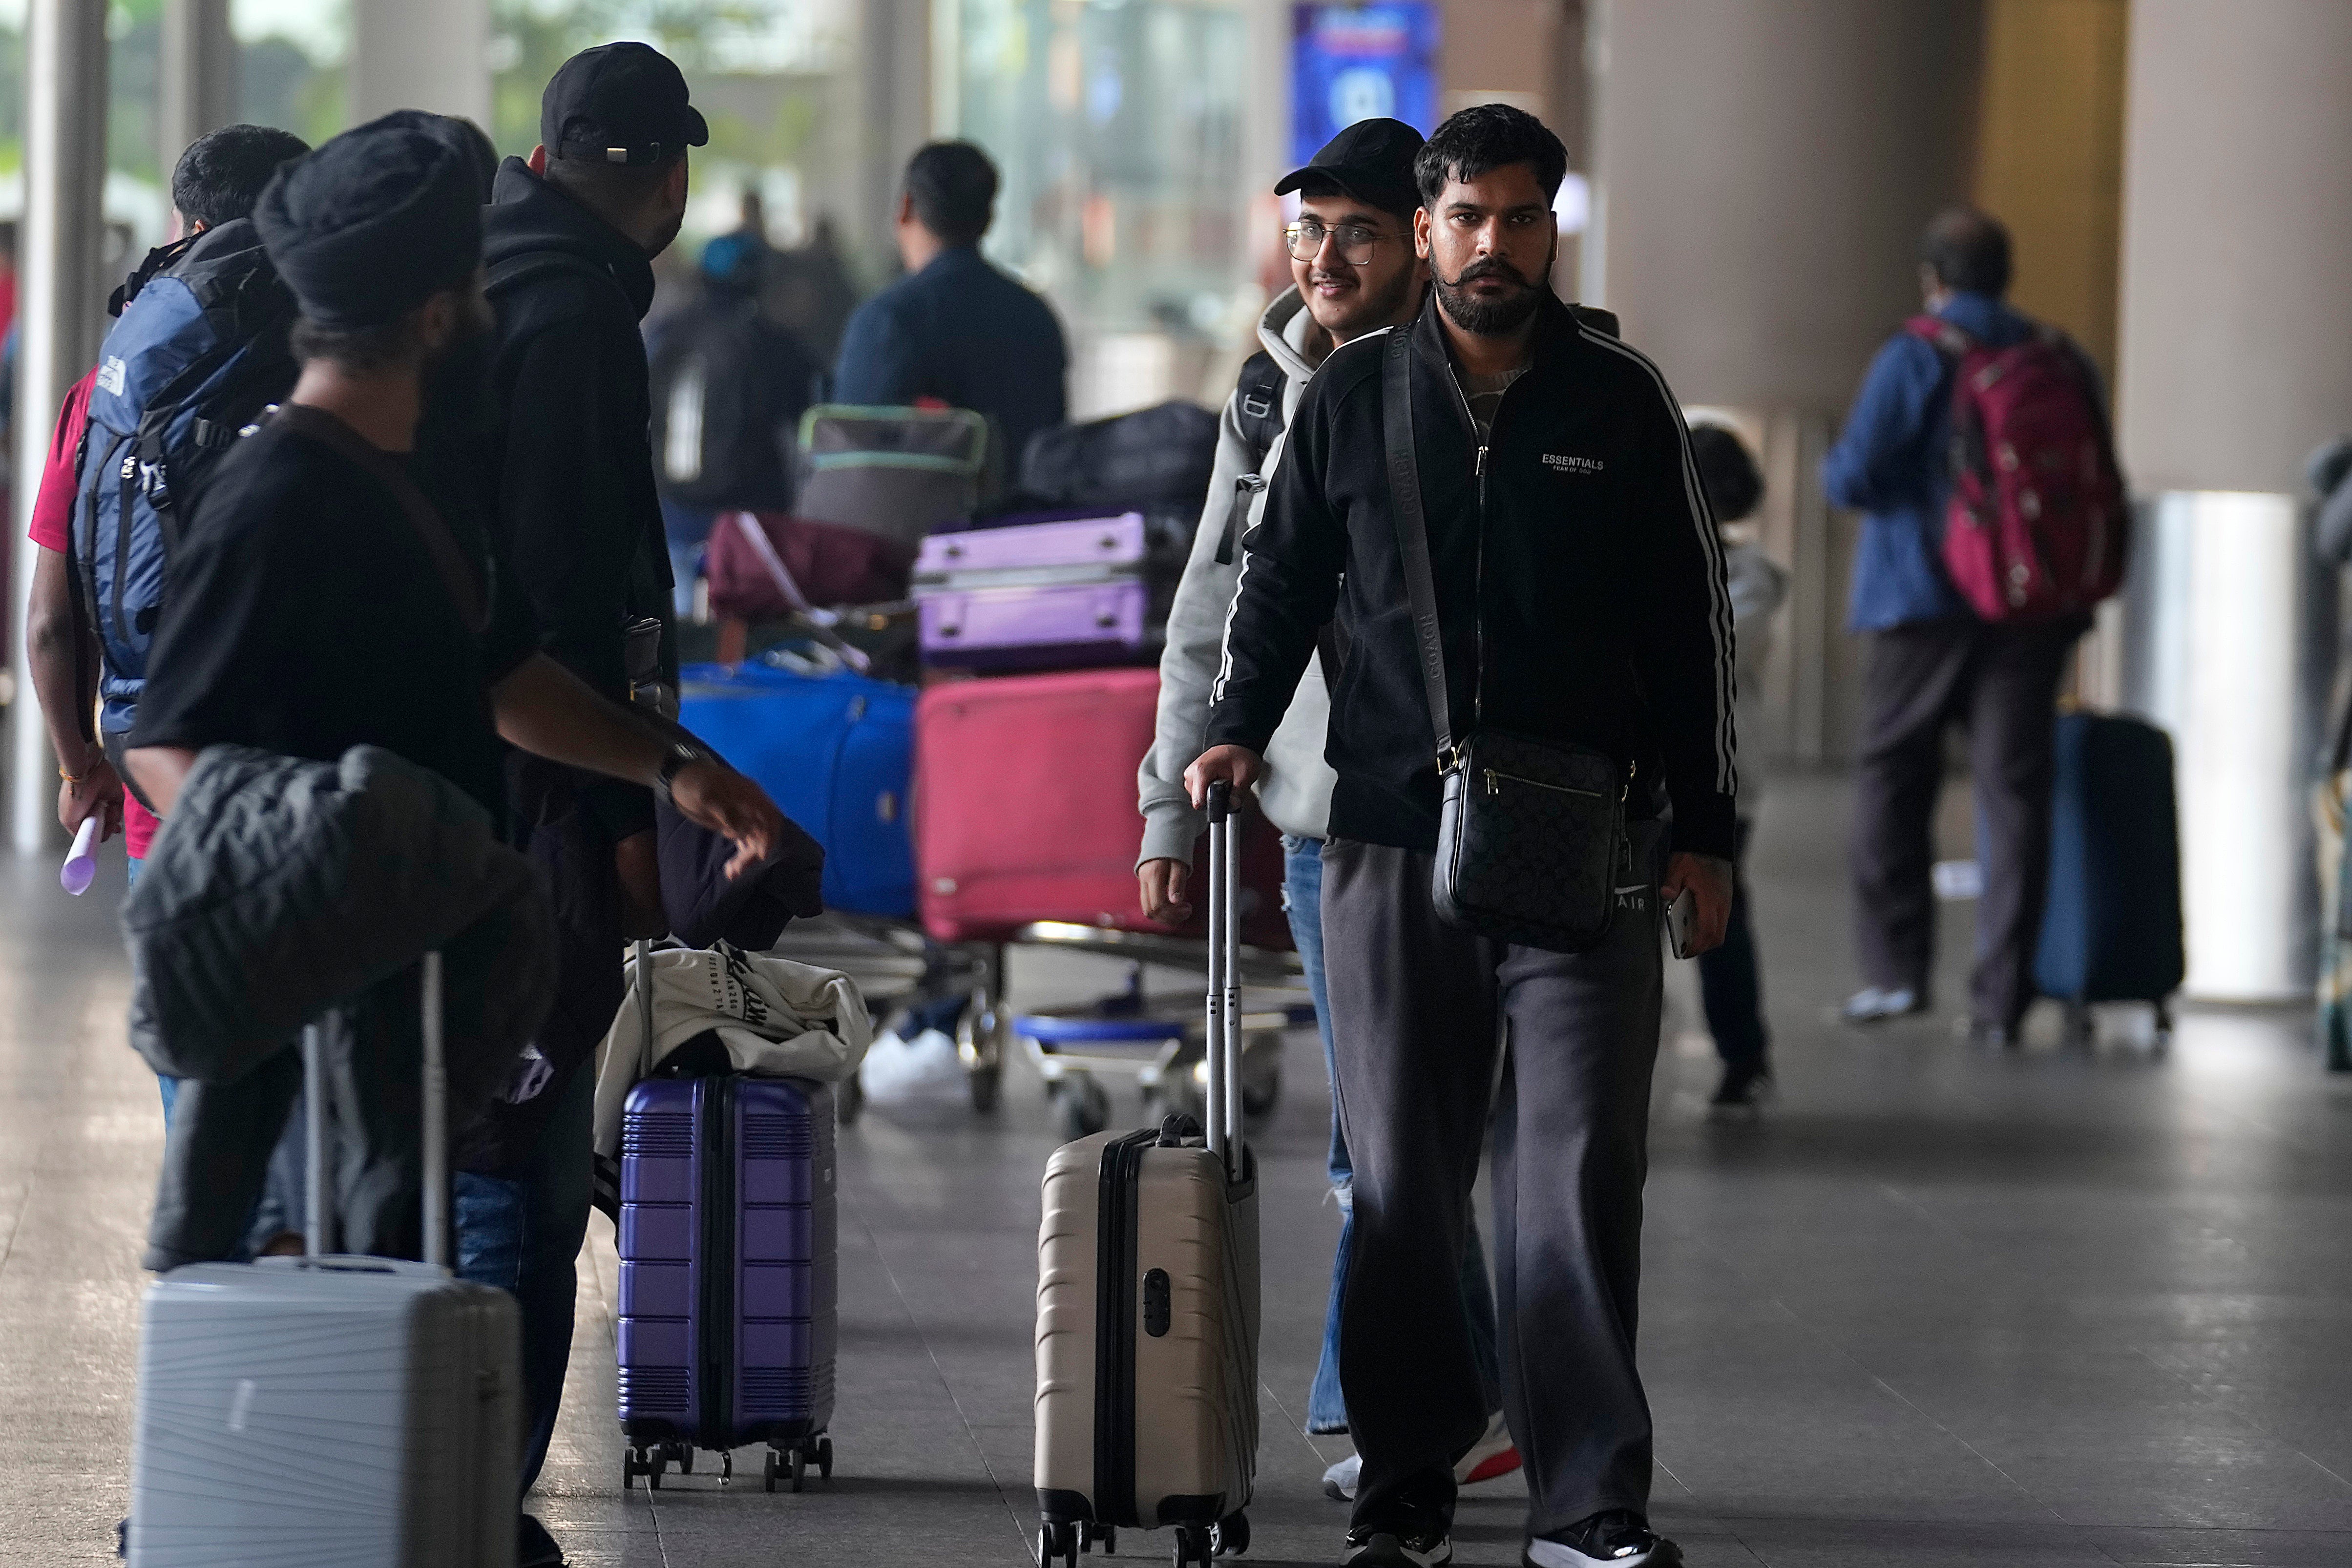 Indian passengers who travelled to France on a Legend Airlines Airbus A340 arrive at an airport in Mumbai after their flight was grounded in France for four days